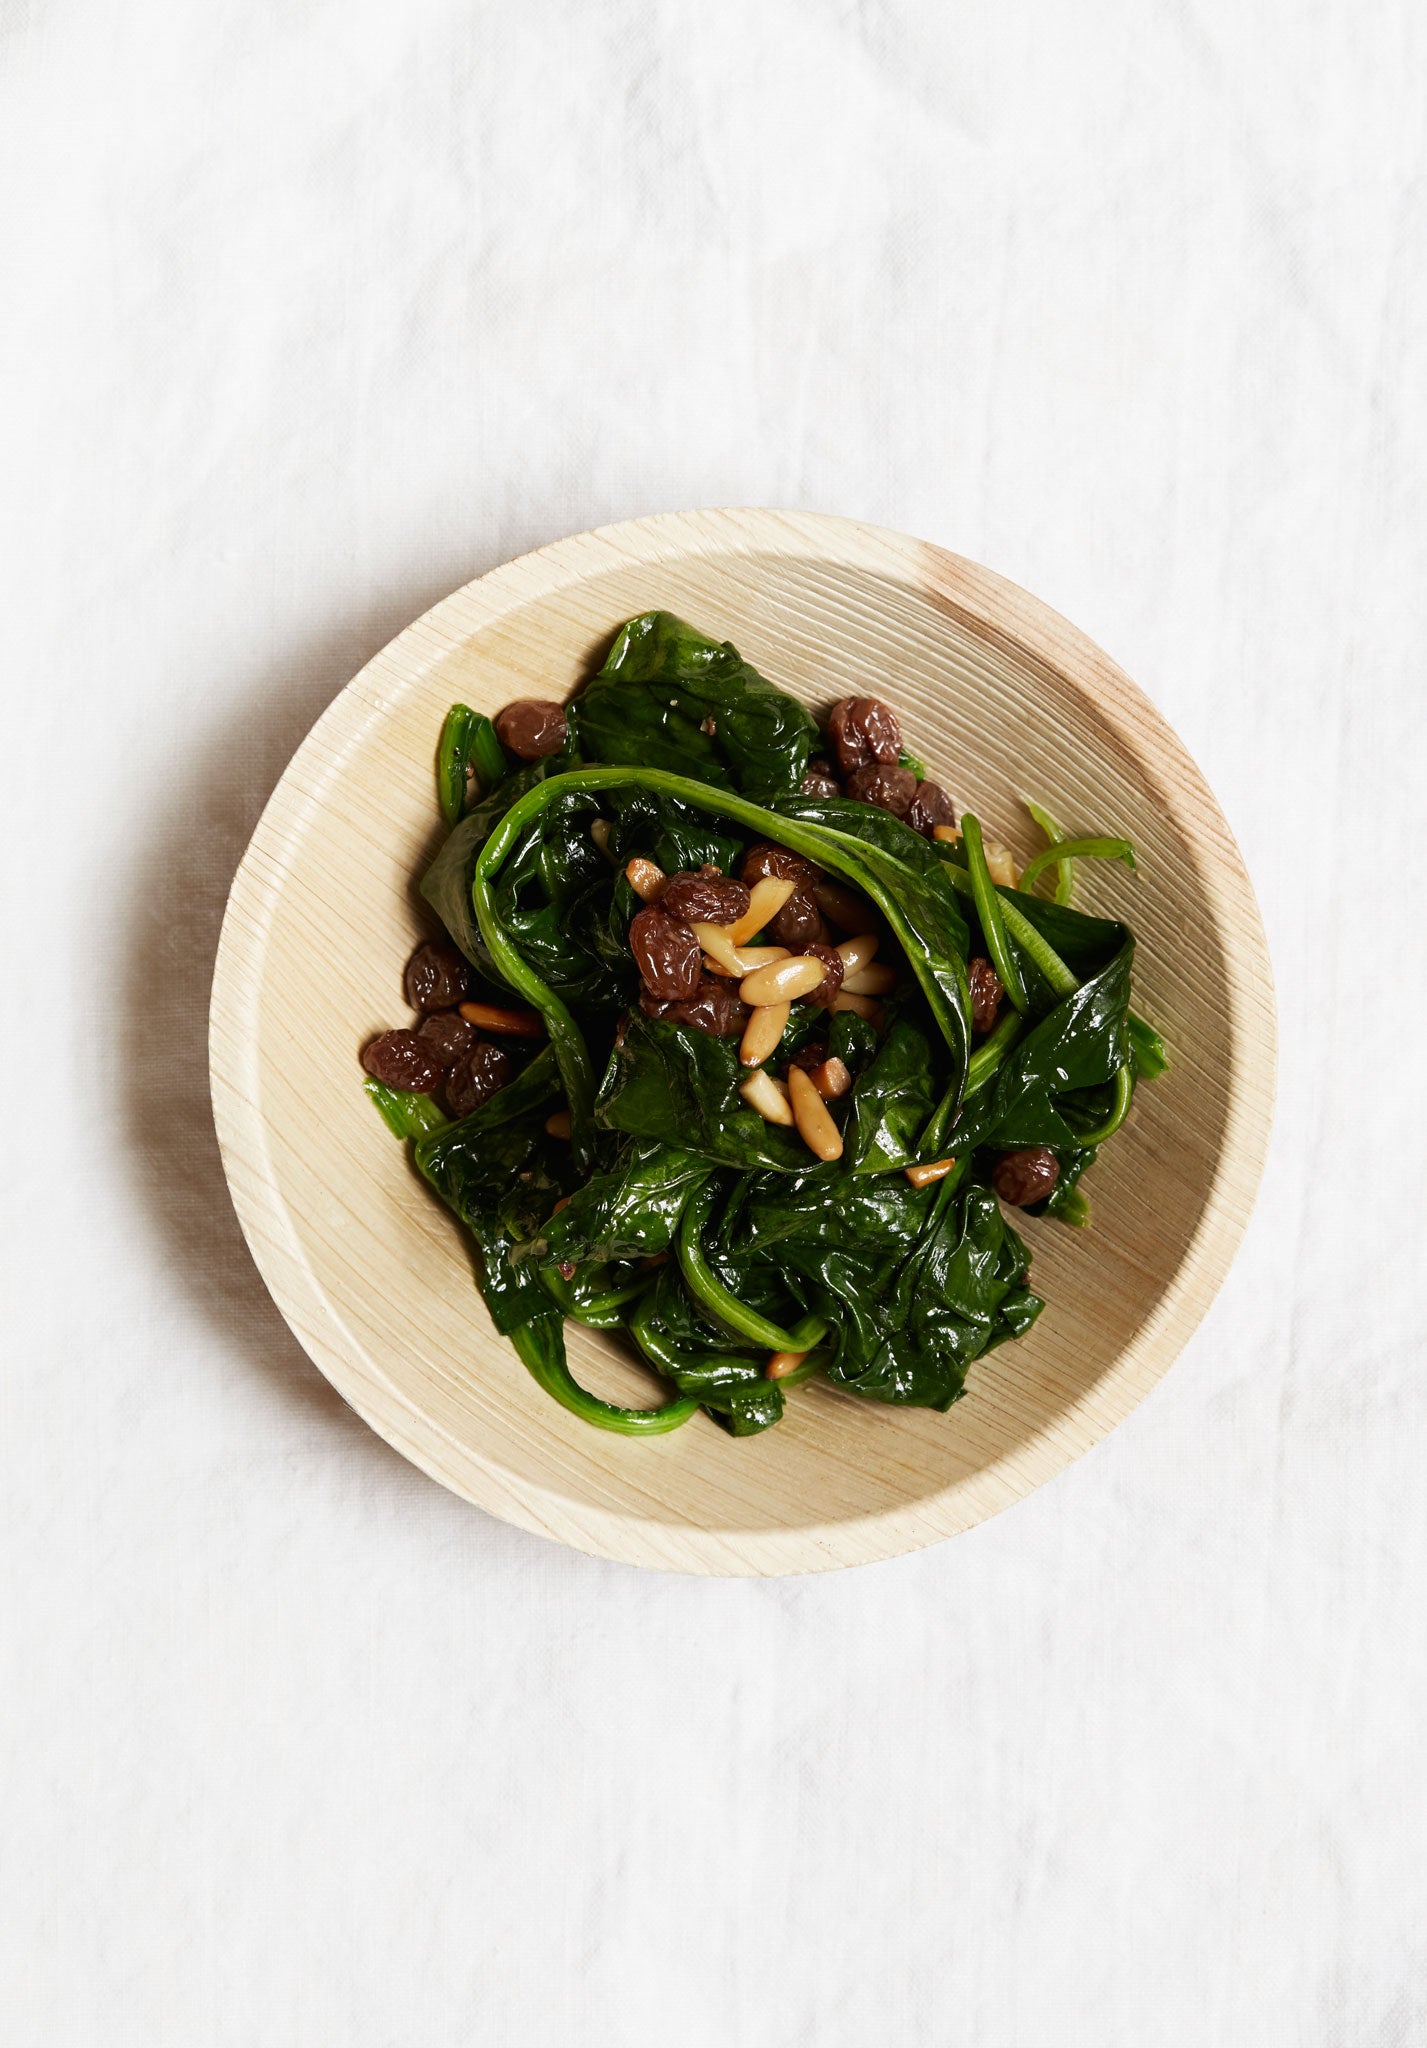 Spinach with raisins and pine nuts can be eaten hot or cold